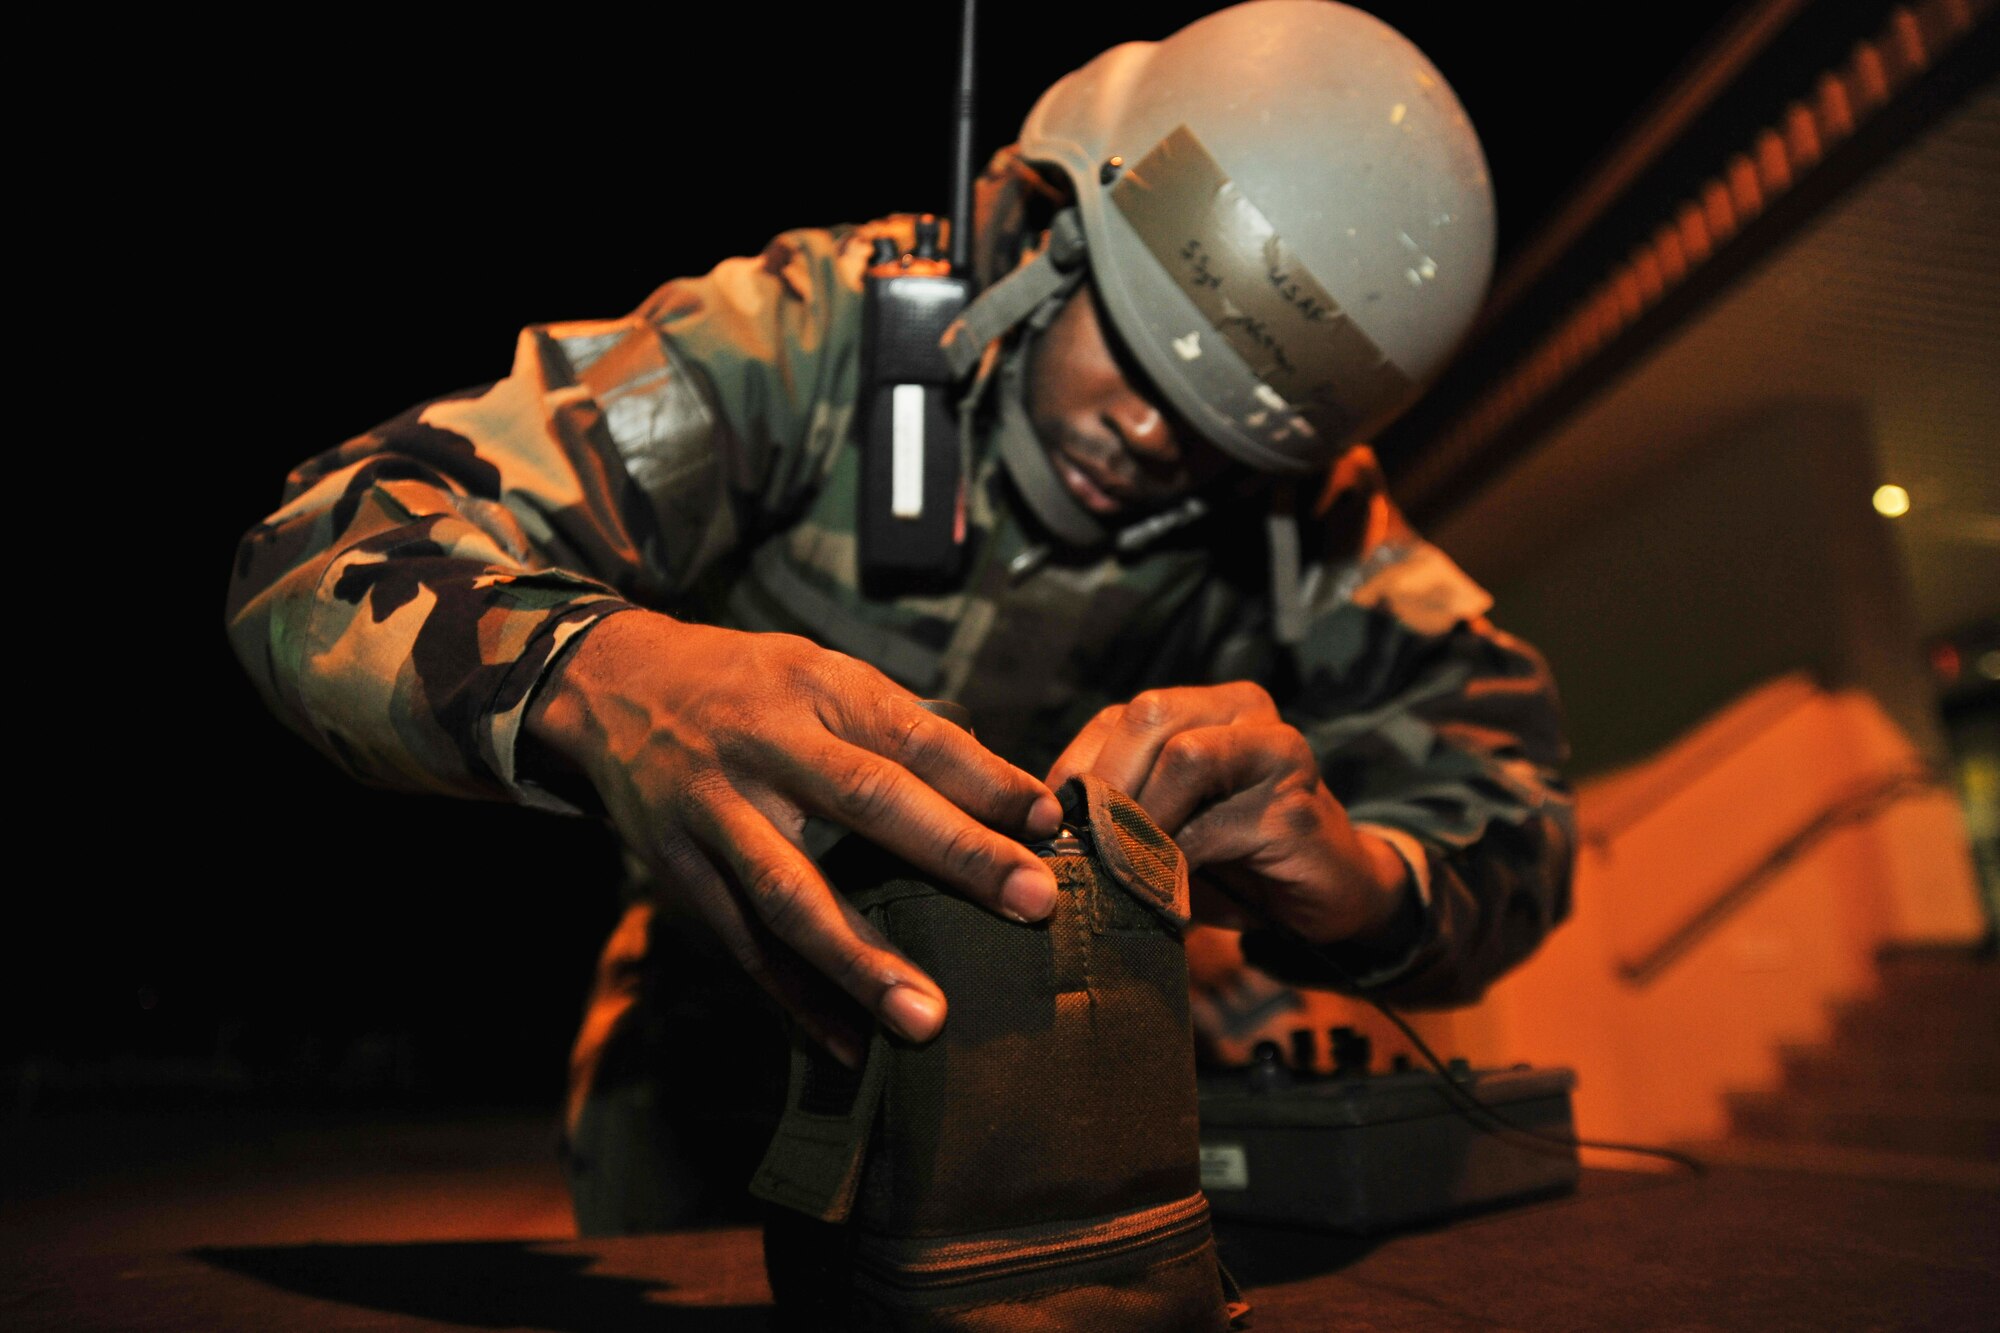 Staff Sgt. Nathan Patrick, 8th Maintenance Operations Squadron readiness support team member, sets up a joint chemical agent detector during exercise Beverly Bulldog 11-3, at Kunsan Air Base, Republic of Korea, Nov. 17, 2011. The readiness flight plans for and assists in protecting people and assets during disasters, major accidents and hostile actions. They help ensure rapid response to and recovery from the effects of such incidents. (U.S. Air Force photo by Senior Airman Brittany Y. Auld/Released)